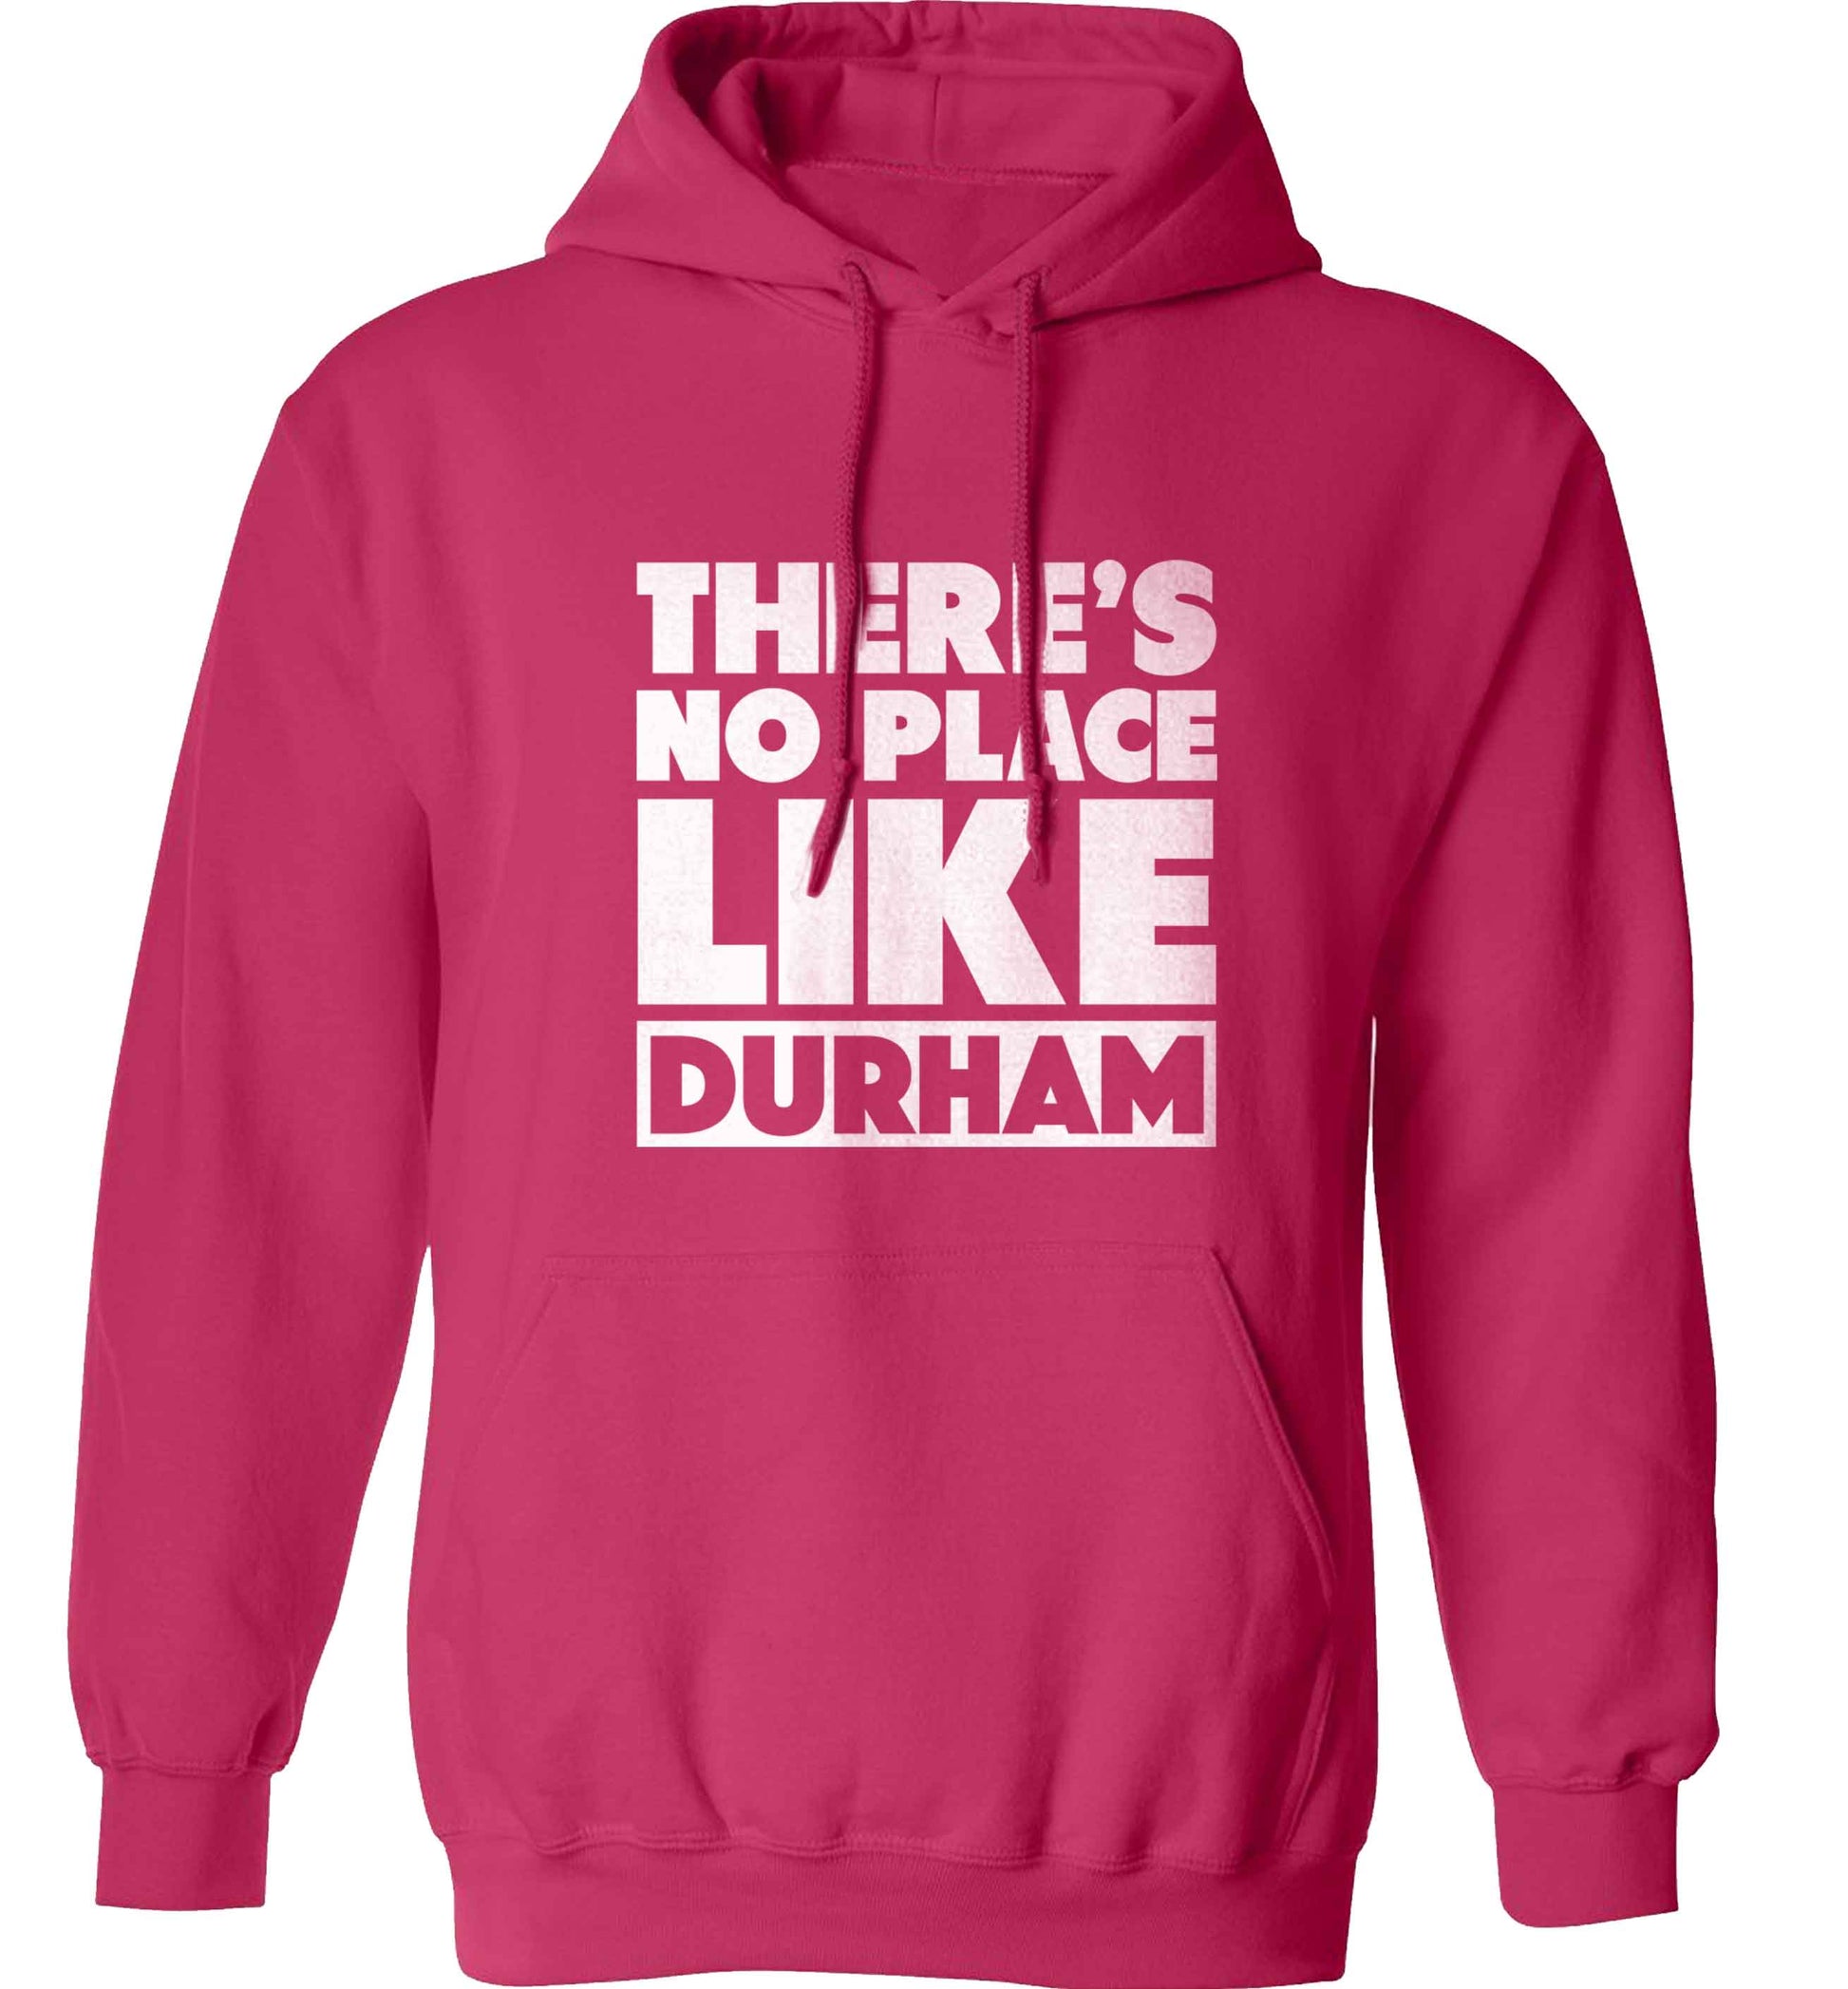 There's no place like Durham adults unisex pink hoodie 2XL